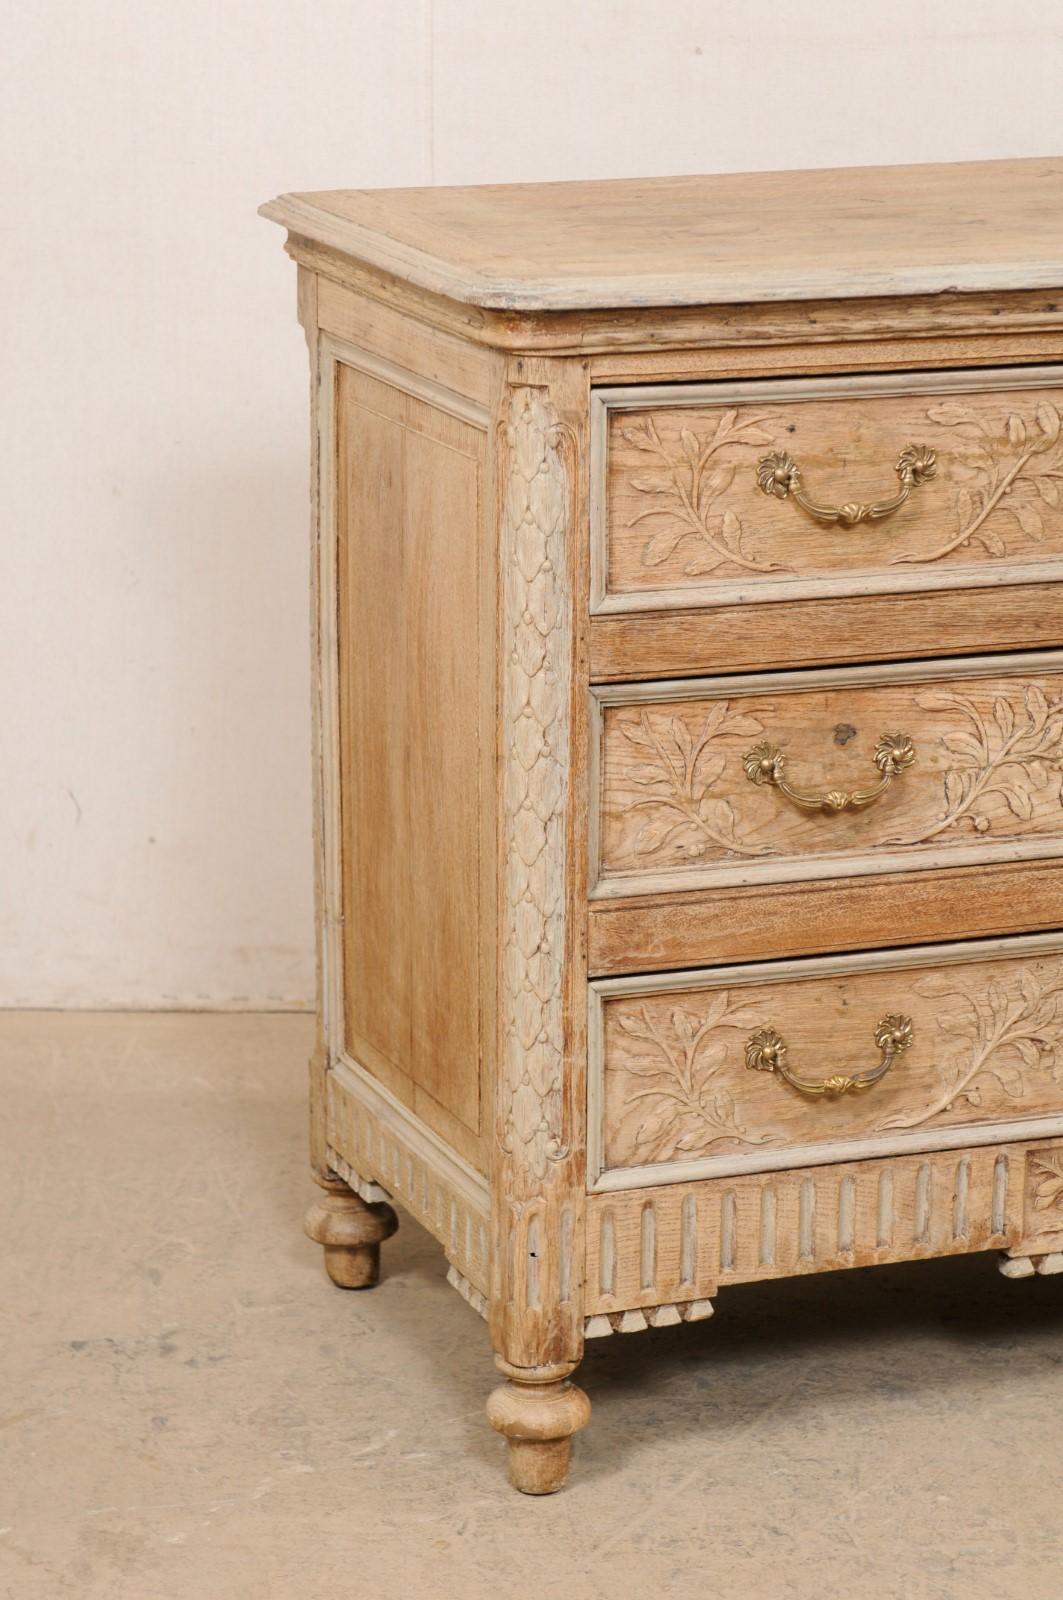 19th Century French Neoclassical Commode Adorn W/Foliage & Fluted Carvings, Early 19th C